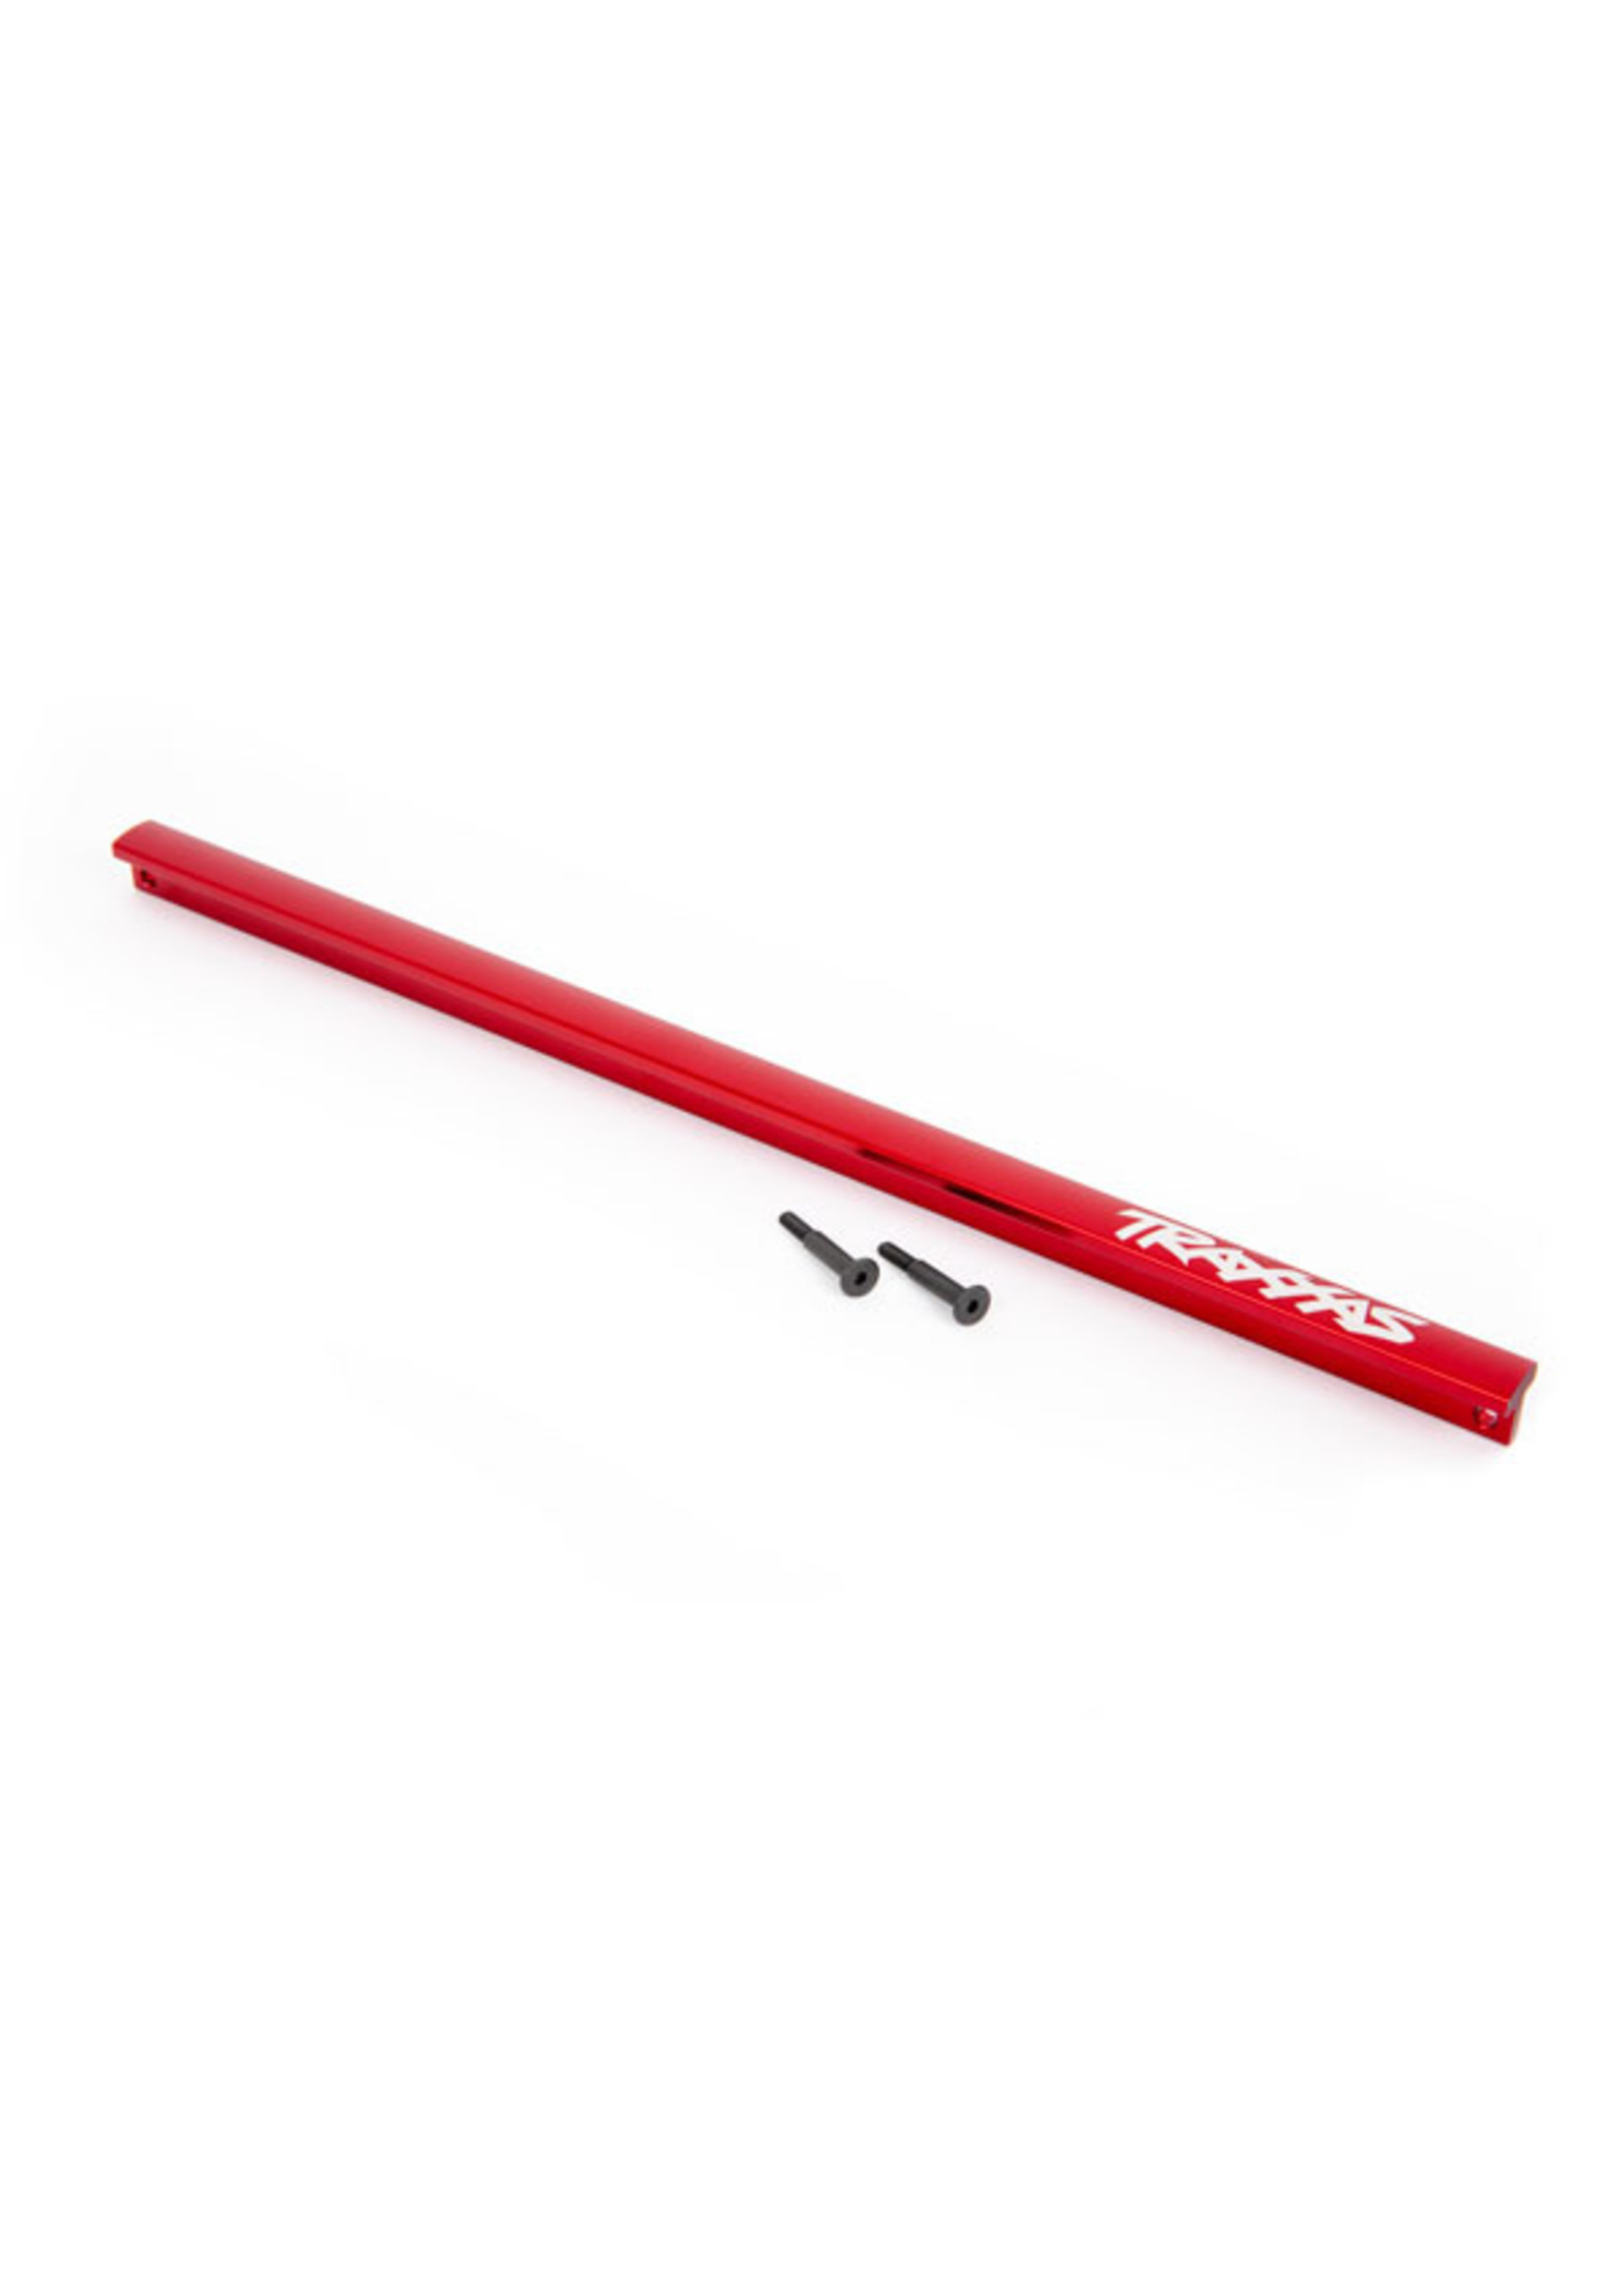 Traxxas 9523R - Chassis Brace T-Bar Aluminum - Red